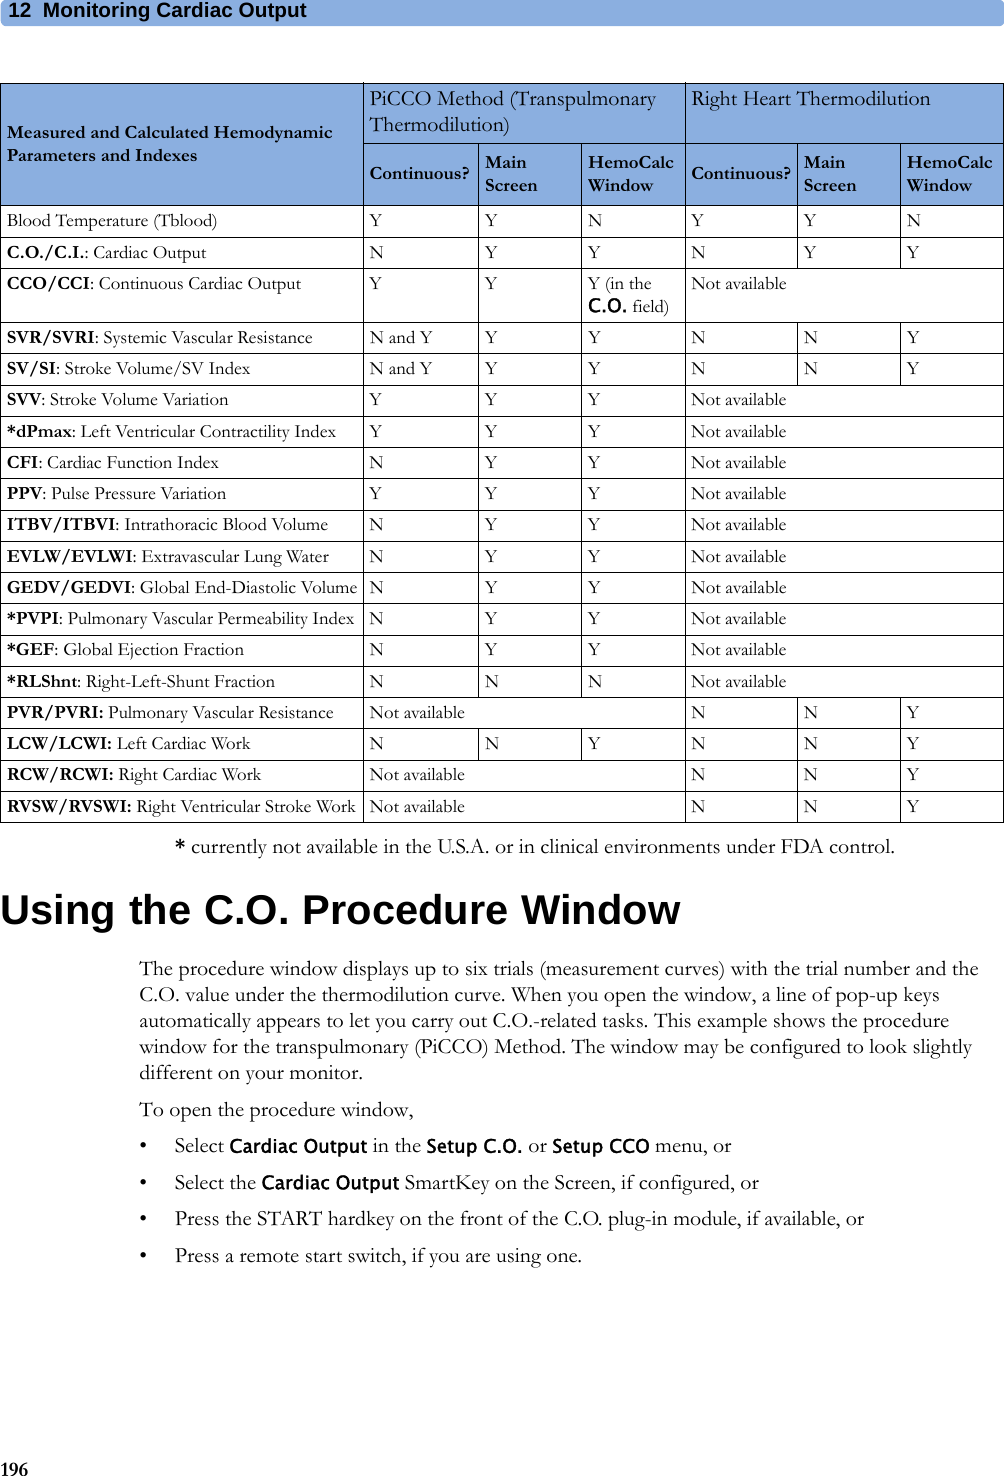 12 Monitoring Cardiac Output196* currently not available in the U.S.A. or in clinical environments under FDA control.Using the C.O. Procedure WindowThe procedure window displays up to six trials (measurement curves) with the trial number and the C.O. value under the thermodilution curve. When you open the window, a line of pop-up keys automatically appears to let you carry out C.O.-related tasks. This example shows the procedure window for the transpulmonary (PiCCO) Method. The window may be configured to look slightly different on your monitor.To open the procedure window,•Select Cardiac Output in the Setup C.O. or Setup CCO menu, or• Select the Cardiac Output SmartKey on the Screen, if configured, or• Press the START hardkey on the front of the C.O. plug-in module, if available, or• Press a remote start switch, if you are using one.Measured and Calculated Hemodynamic Parameters and IndexesPiCCO Method (Transpulmonary Thermodilution)Right Heart ThermodilutionContinuous? Main ScreenHemoCalc Window Continuous? Main ScreenHemoCalc WindowBlood Temperature (Tblood) Y Y N Y Y NC.O./C.I.: Cardiac Output N YYN YYCCO/CCI: Continuous Cardiac Output Y Y Y (in the C.O. field)Not availableSVR/SVRI: Systemic Vascular Resistance N and Y Y Y N N YSV/SI: Stroke Volume/SV Index N and Y Y Y N N YSVV: Stroke Volume Variation Y Y Y Not available*dPmax: Left Ventricular Contractility Index Y Y Y Not availableCFI: Cardiac Function Index N Y Y Not availablePPV: Pulse Pressure Variation Y Y Y Not availableITBV/ITBVI: Intrathoracic Blood Volume N Y Y Not availableEVLW/EVLWI: Extravascular Lung Water N Y Y Not availableGEDV/GEDVI: Global End-Diastolic Volume N Y Y Not available*PVPI: Pulmonary Vascular Permeability Index N Y Y Not available*GEF: Global Ejection Fraction N Y Y Not available*RLShnt: Right-Left-Shunt Fraction N N N Not availablePVR/PVRI: Pulmonary Vascular Resistance Not available N N YLCW/LCWI: Left Cardiac Work N N Y N N YRCW/RCWI: Right Cardiac Work Not available N N YRVSW/RVSWI: Right Ventricular Stroke Work Not available N N Y